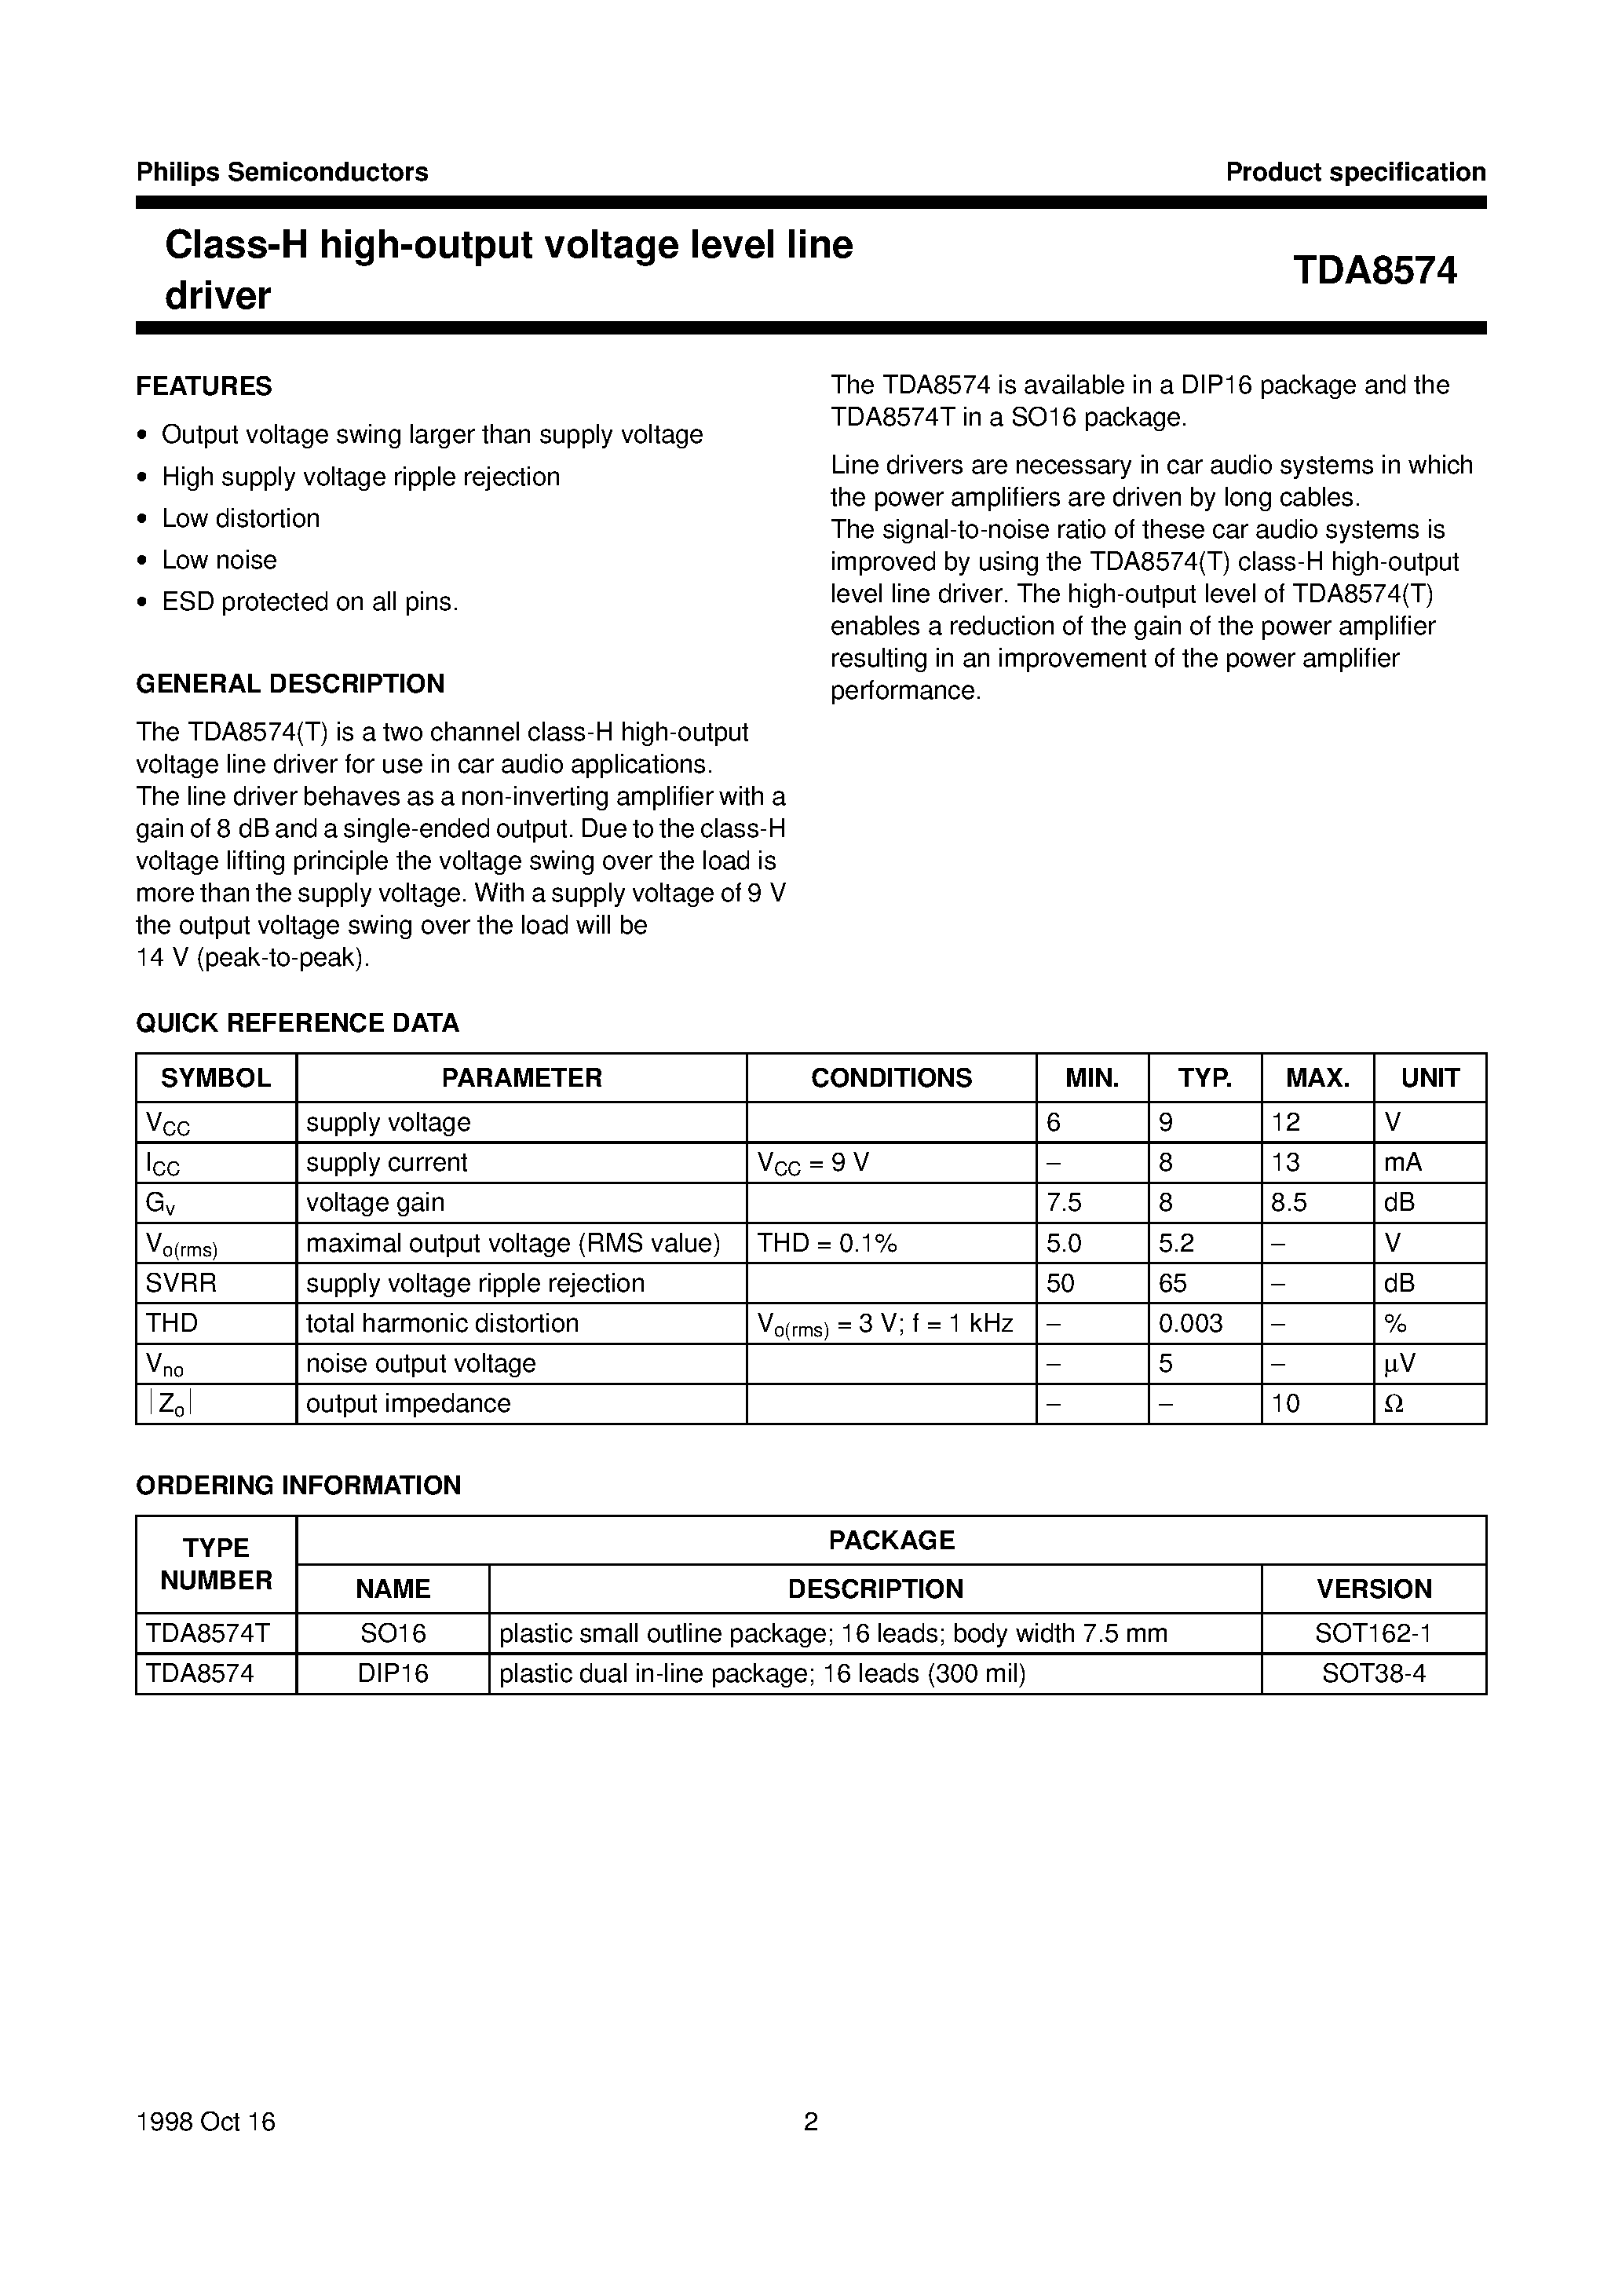 Datasheet TDA8574 - Class-H high-output voltage level line driver page 2